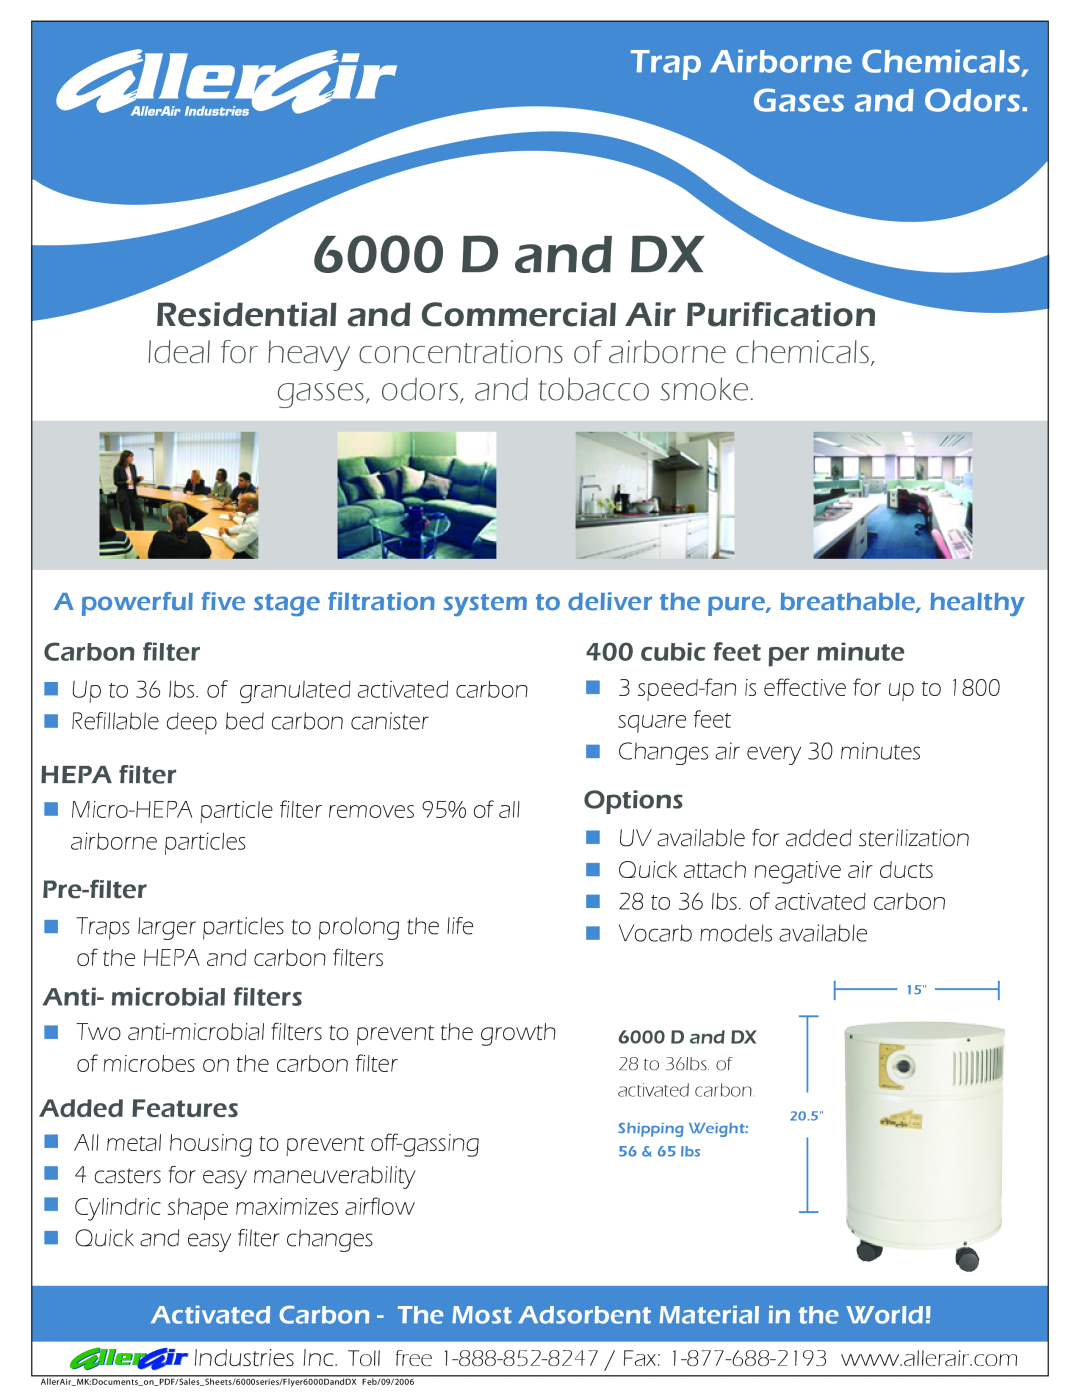 AllerAir 6000 D manual D and DX, Residential and Commercial Air Purification, Trap Airborne Chemicals Gases and Odors 